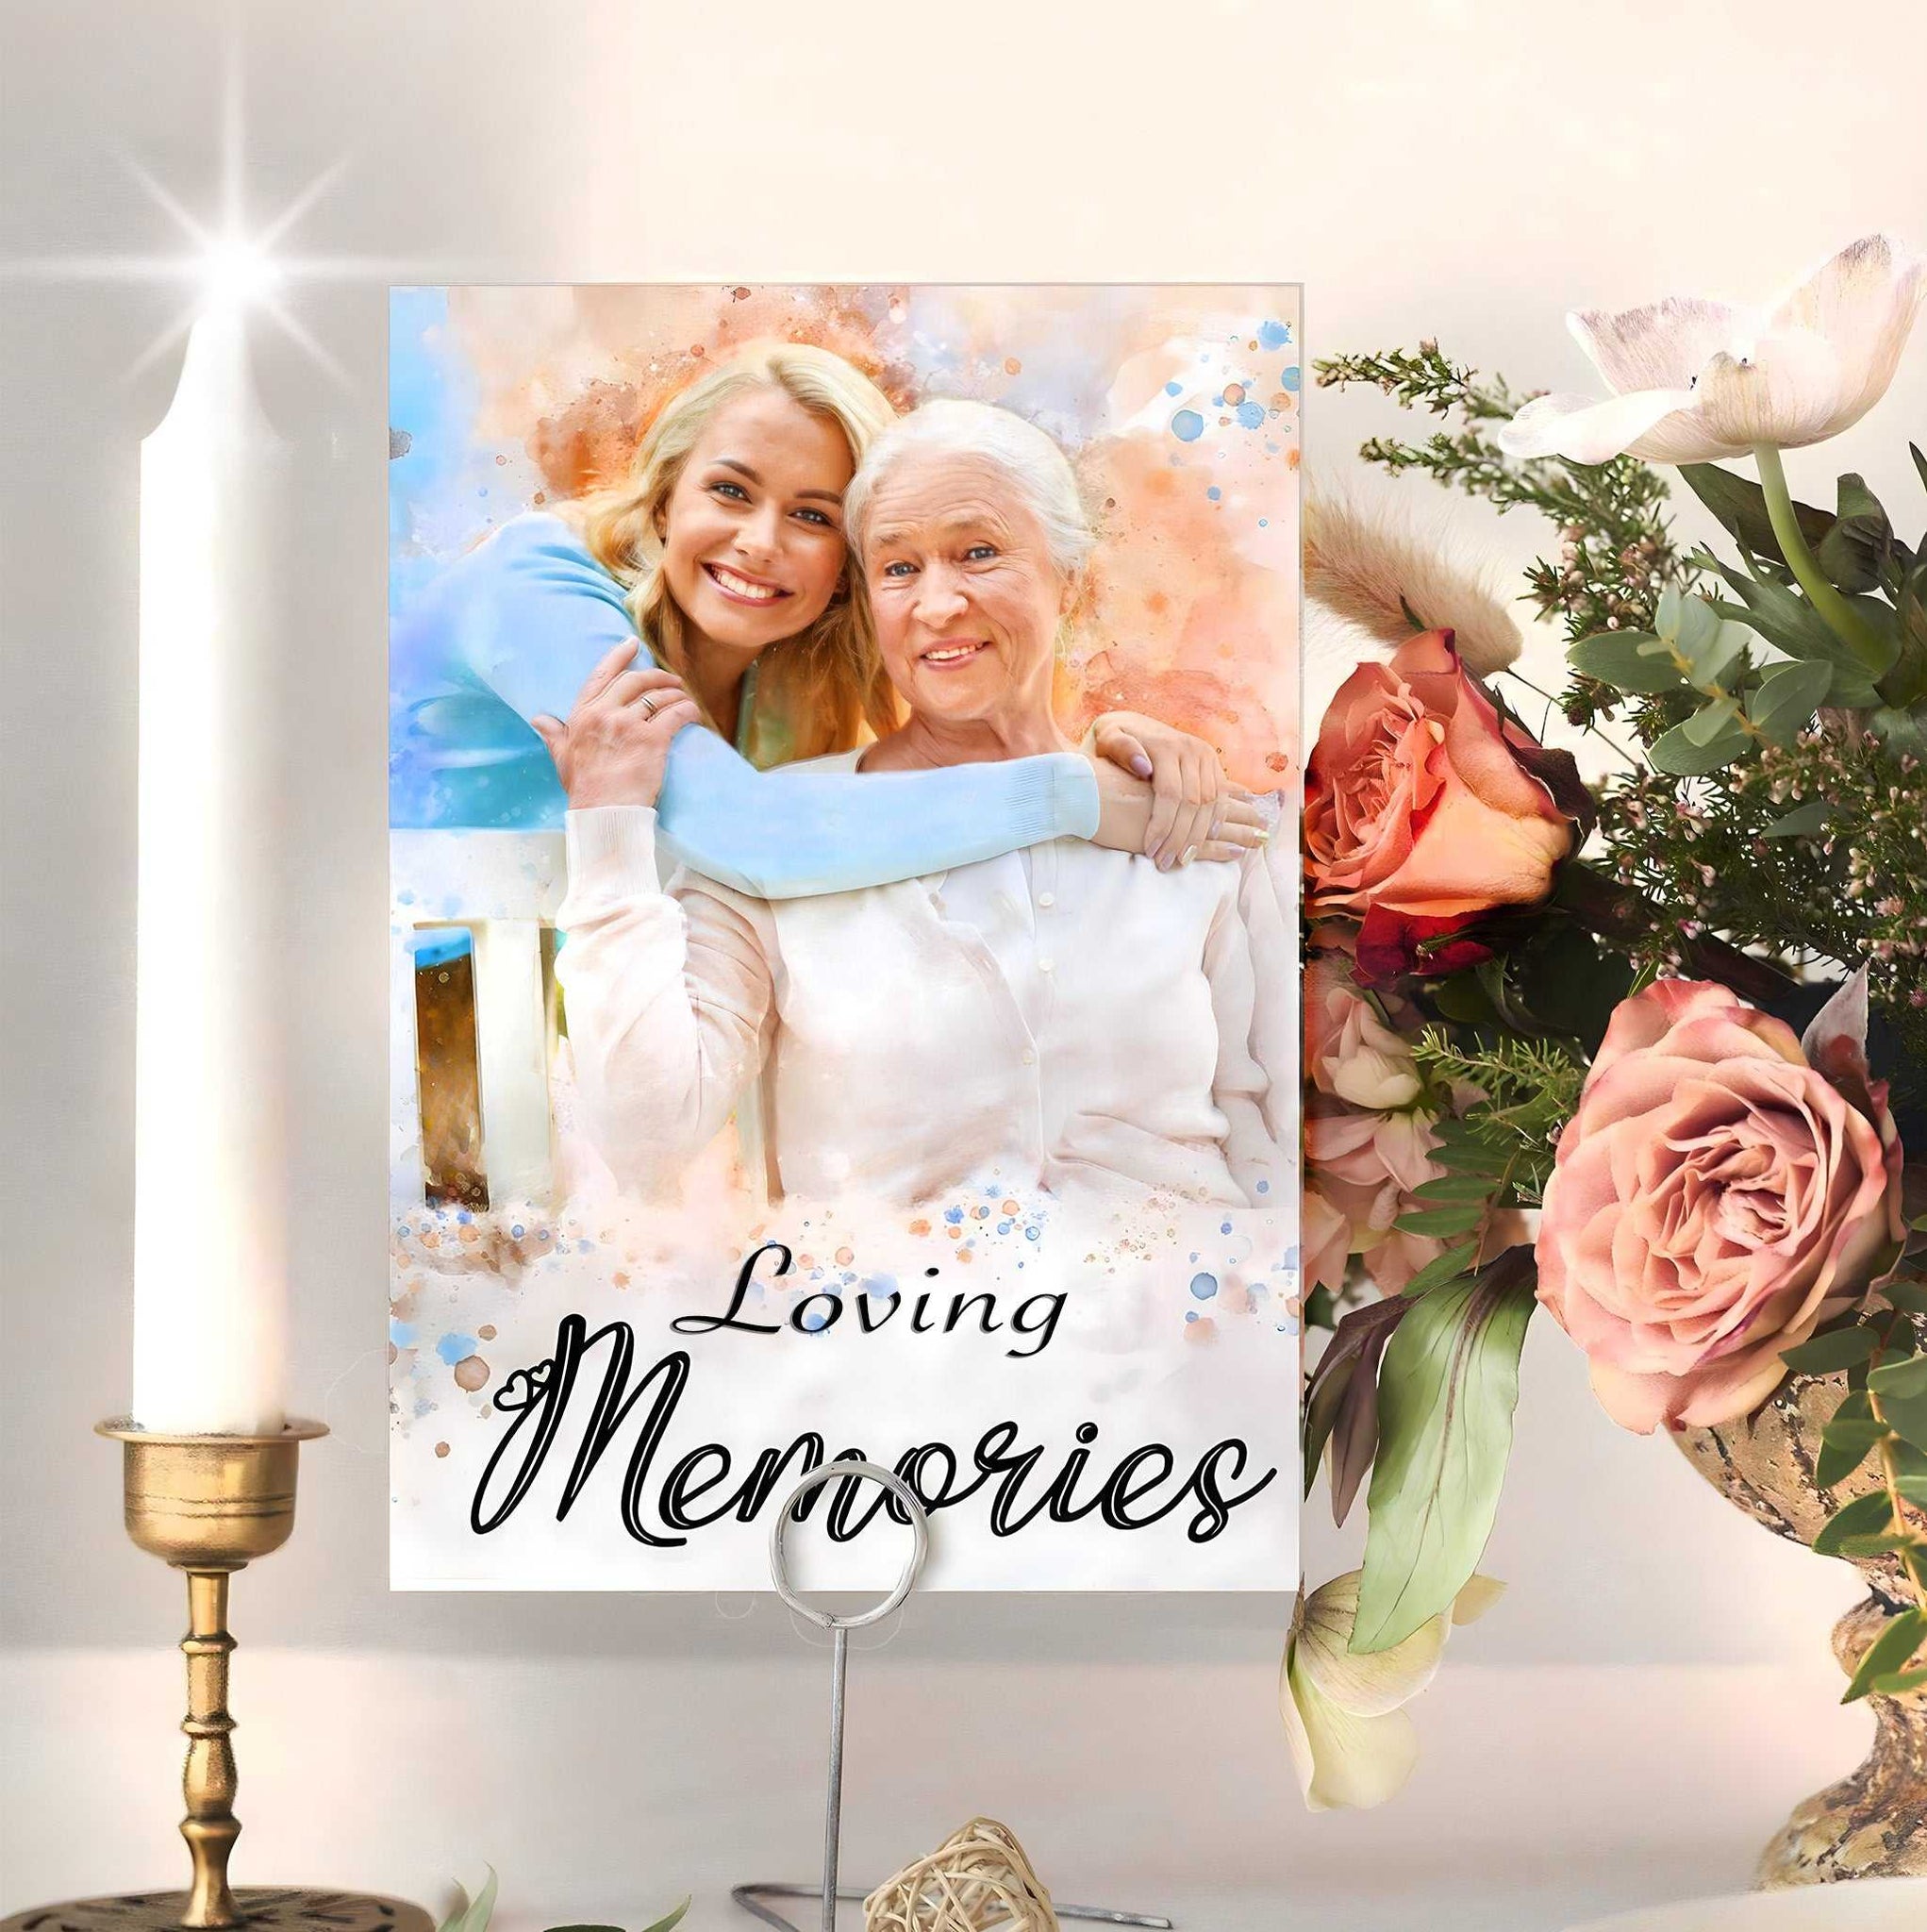 🌈 Combine Photos and Images | Merge Images to one Family Pictures with Deceased Loved One - FromPicToArt